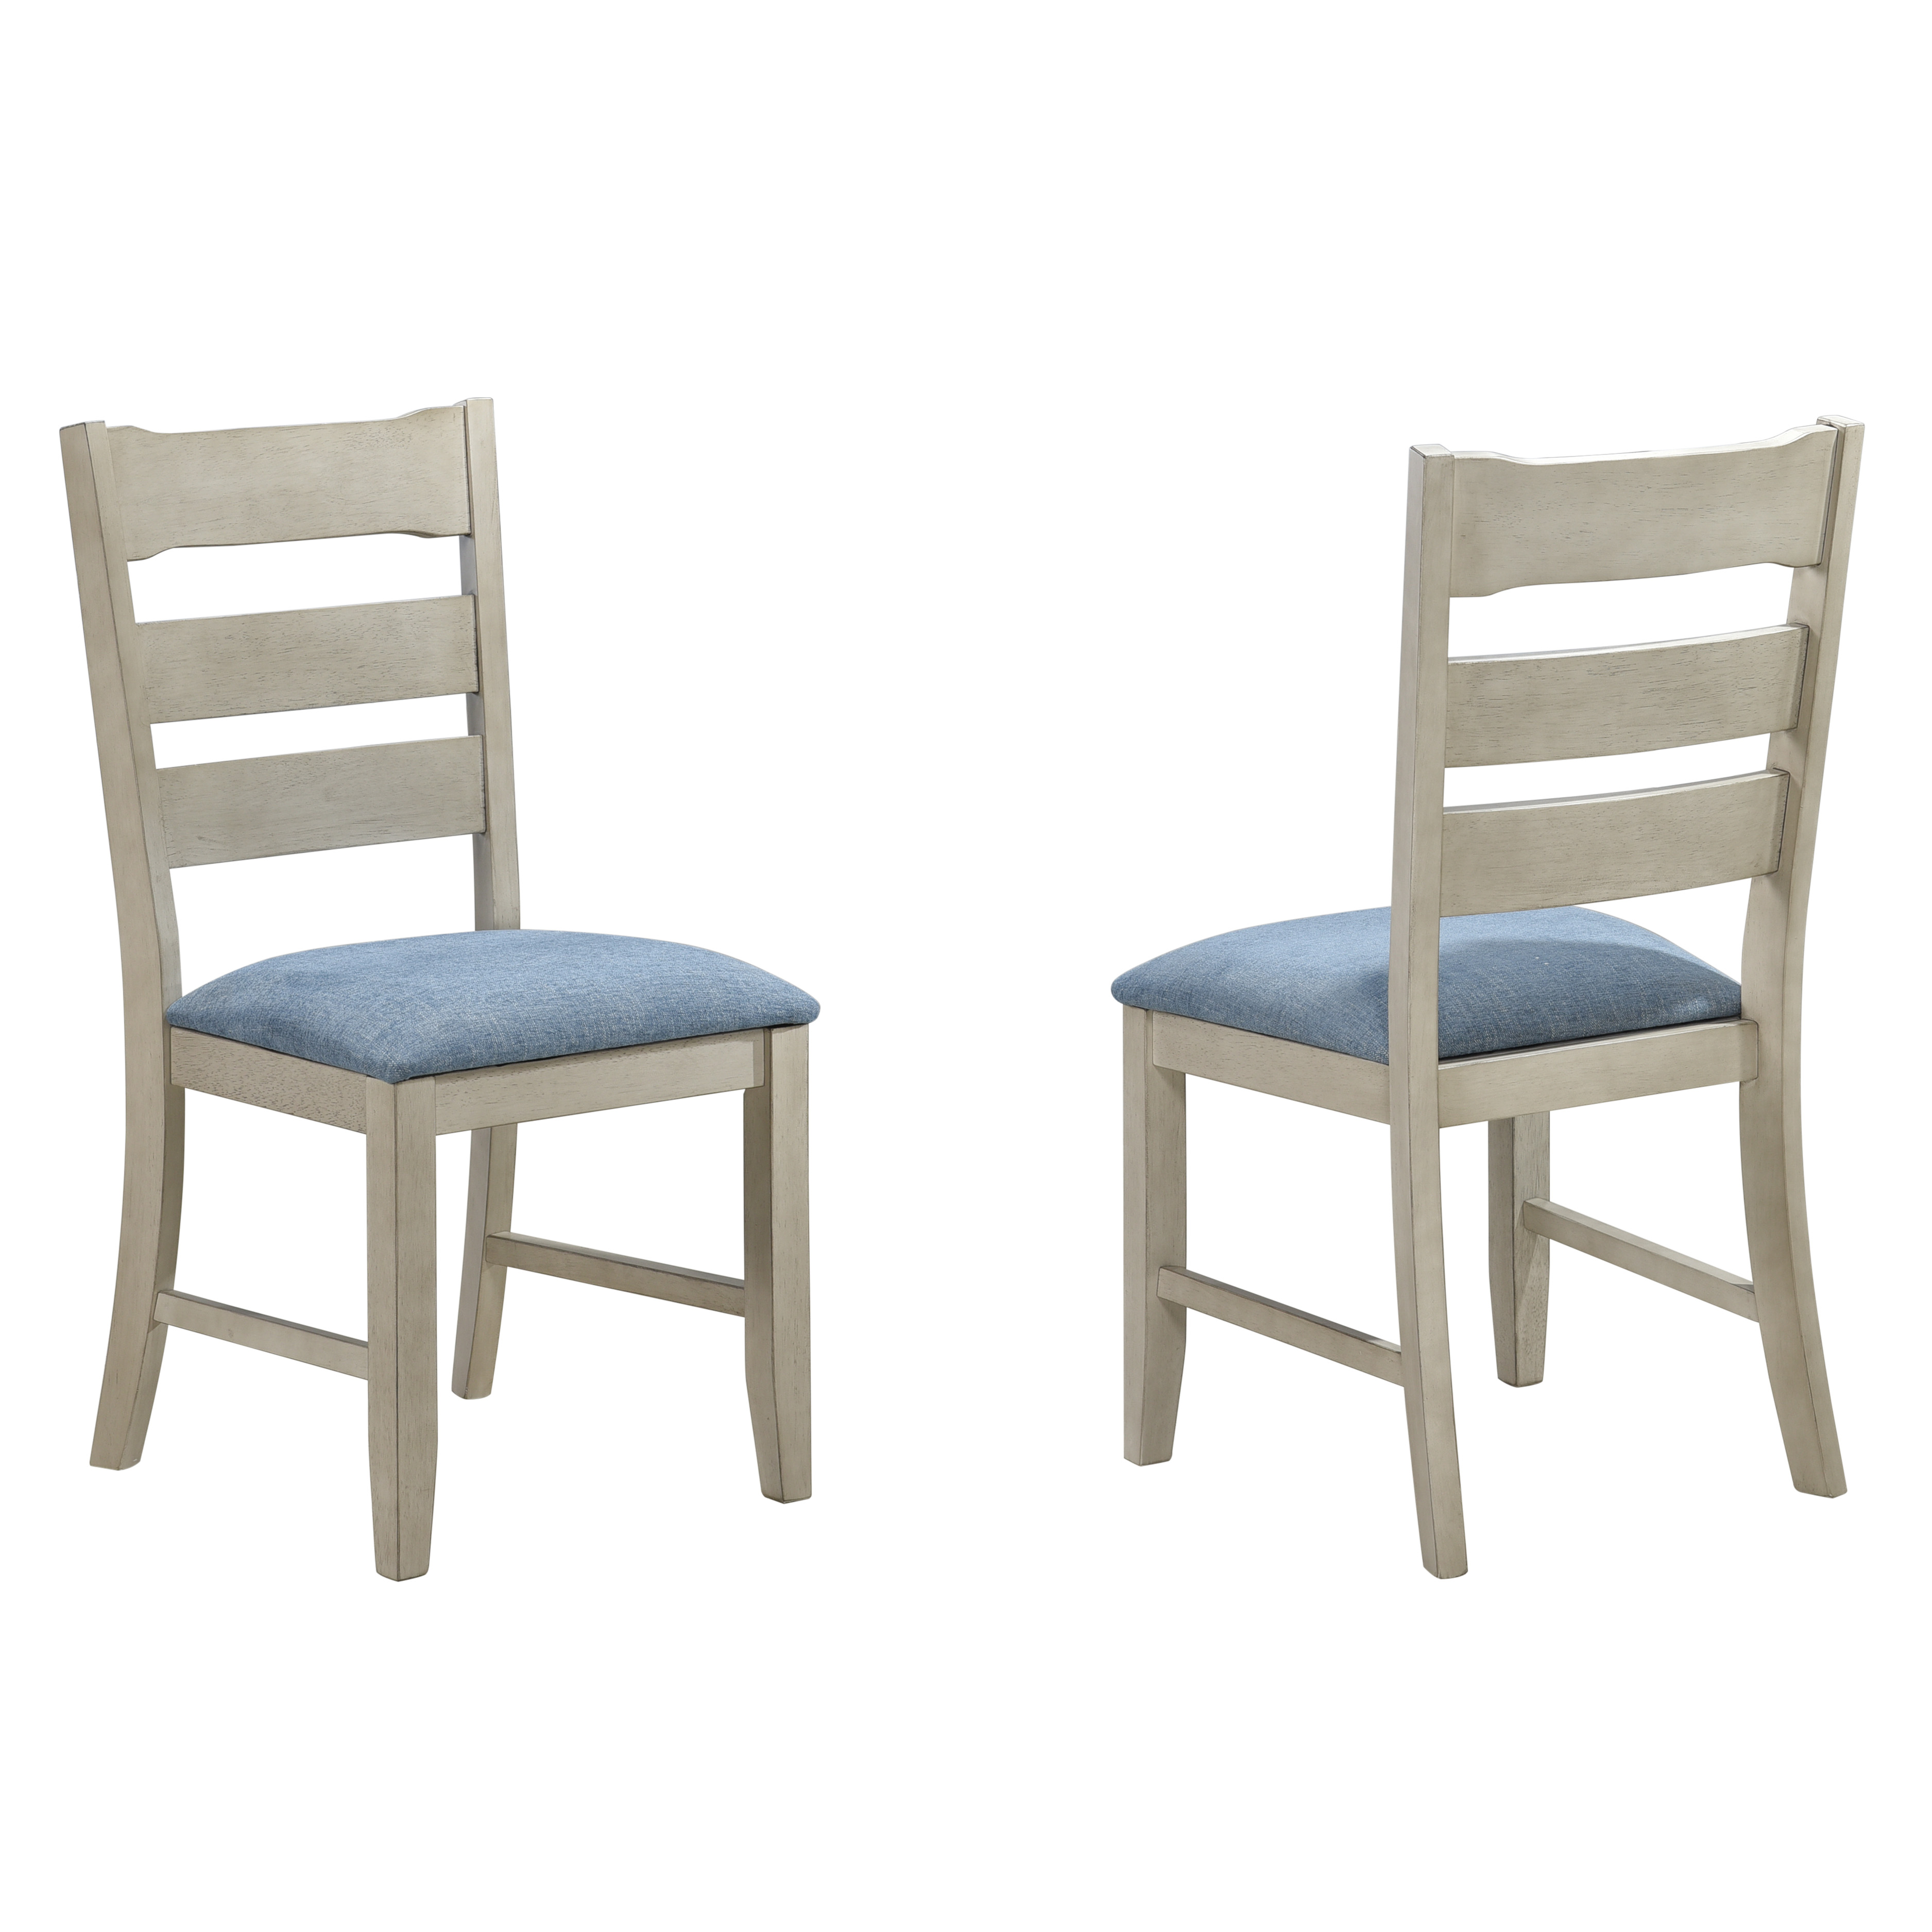 Tamera Dining Chairs - Set of 2